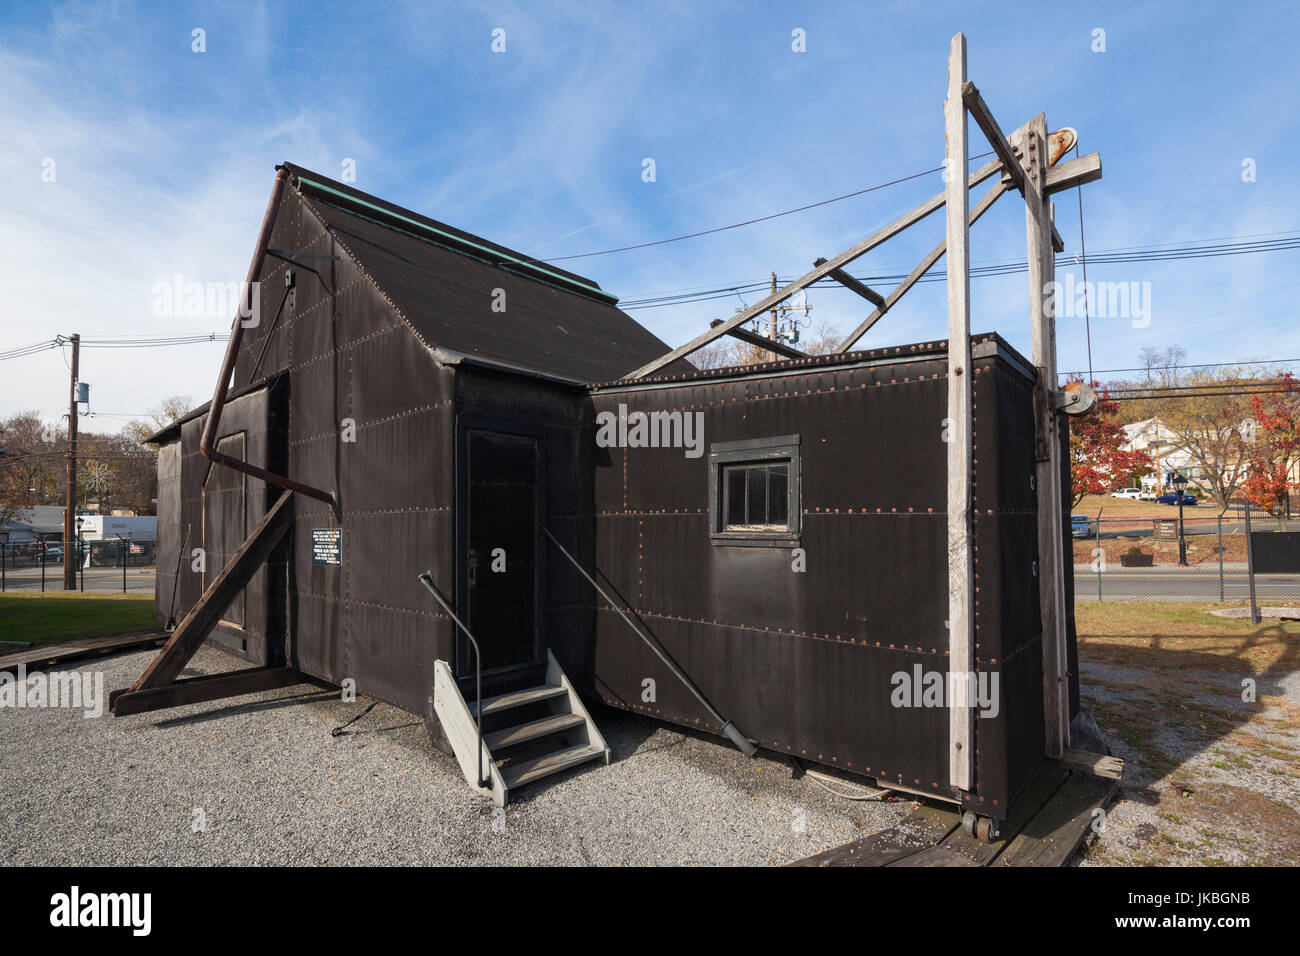 USA, New Jersey, West Orange, Thomas Edison National Historical Park, Black Maria, world's first movable film studio built on a turntable, exterior Stock Photo